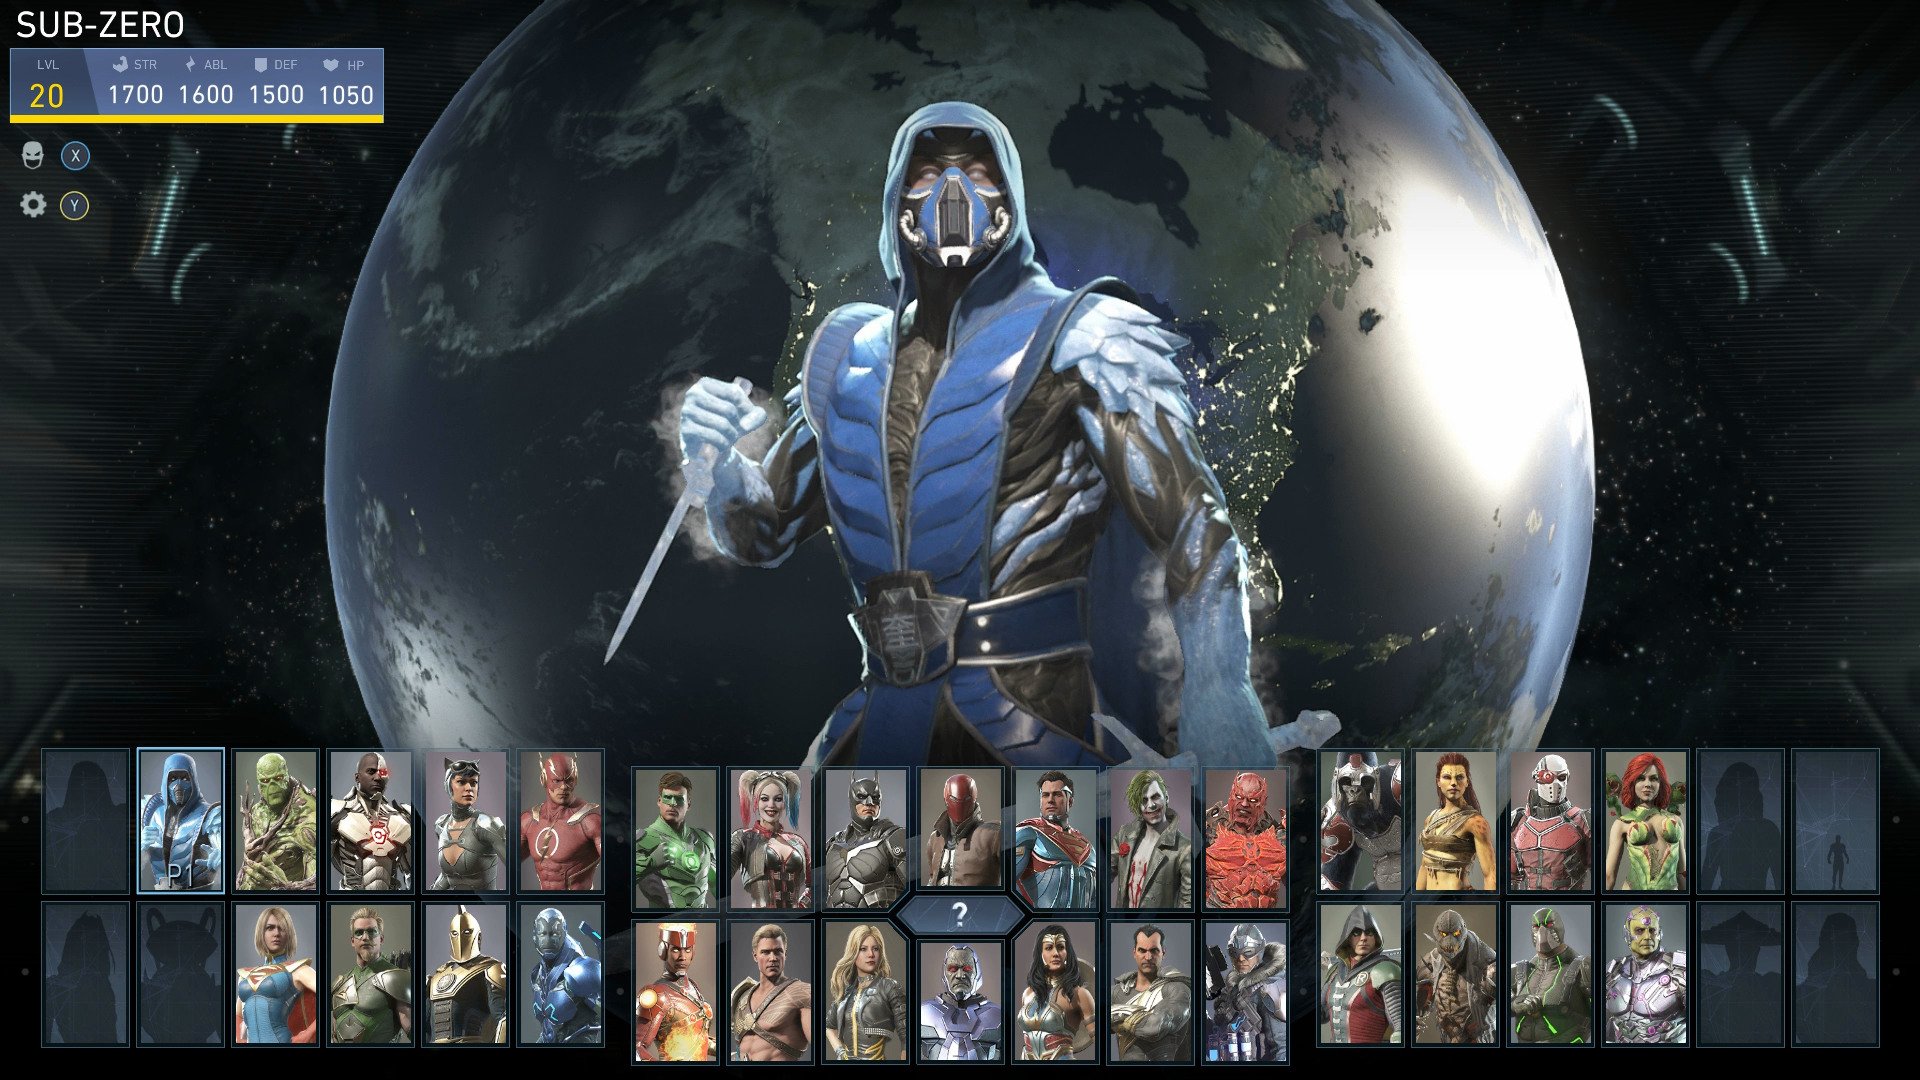 Injustice 2 Sub-Zero character guide select